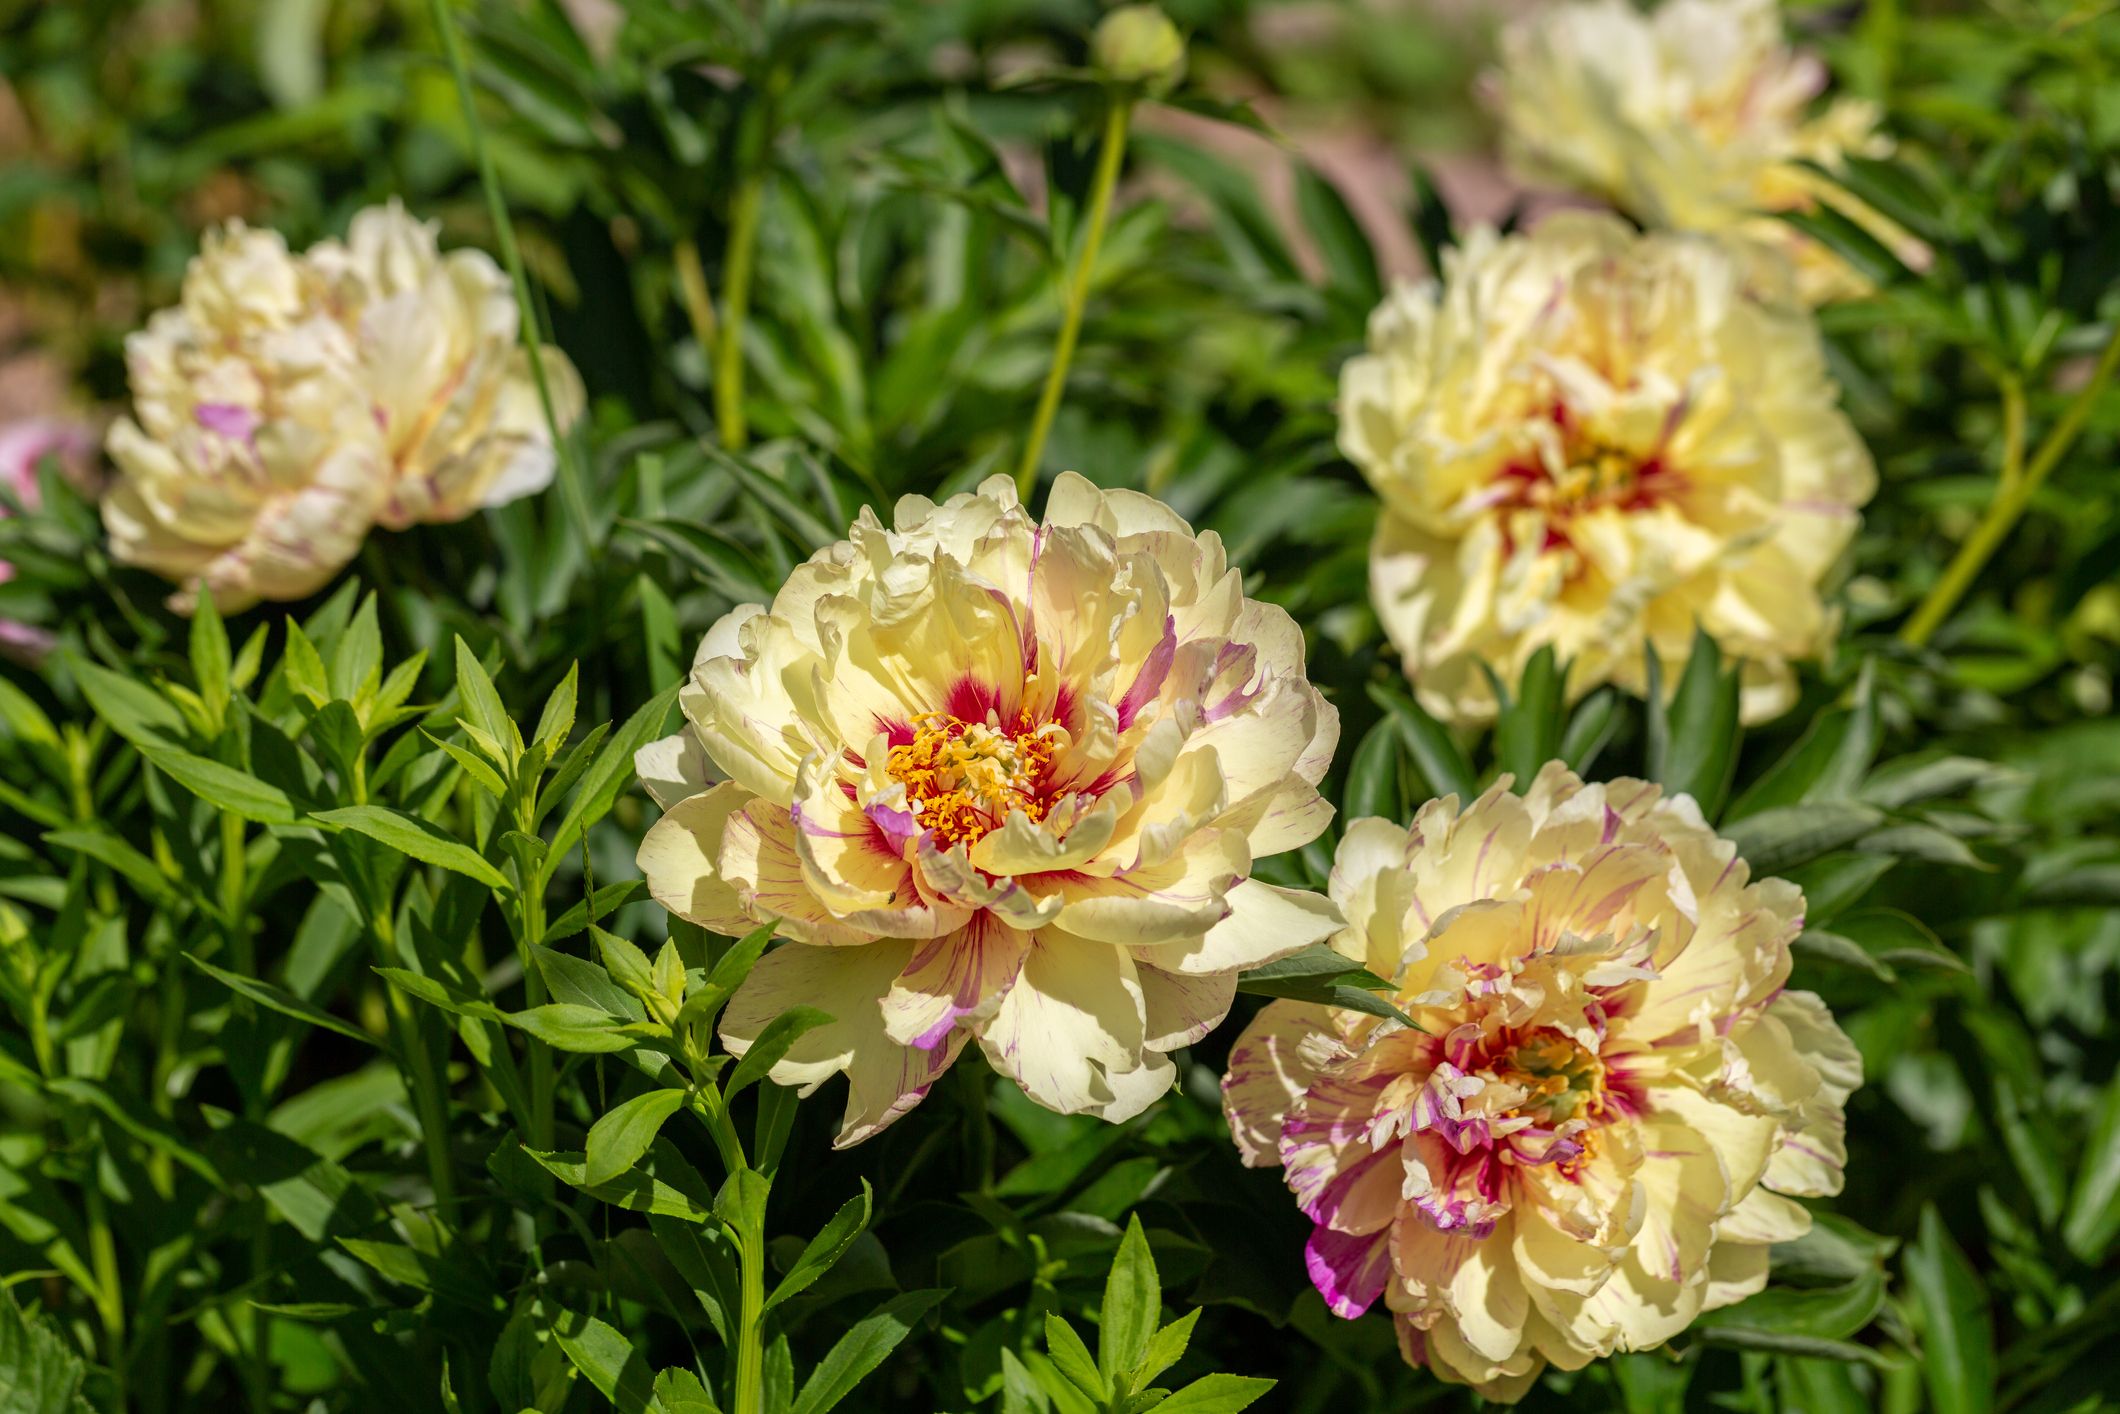 paeonia itoh hybrids "lolliepop" in the spring garden